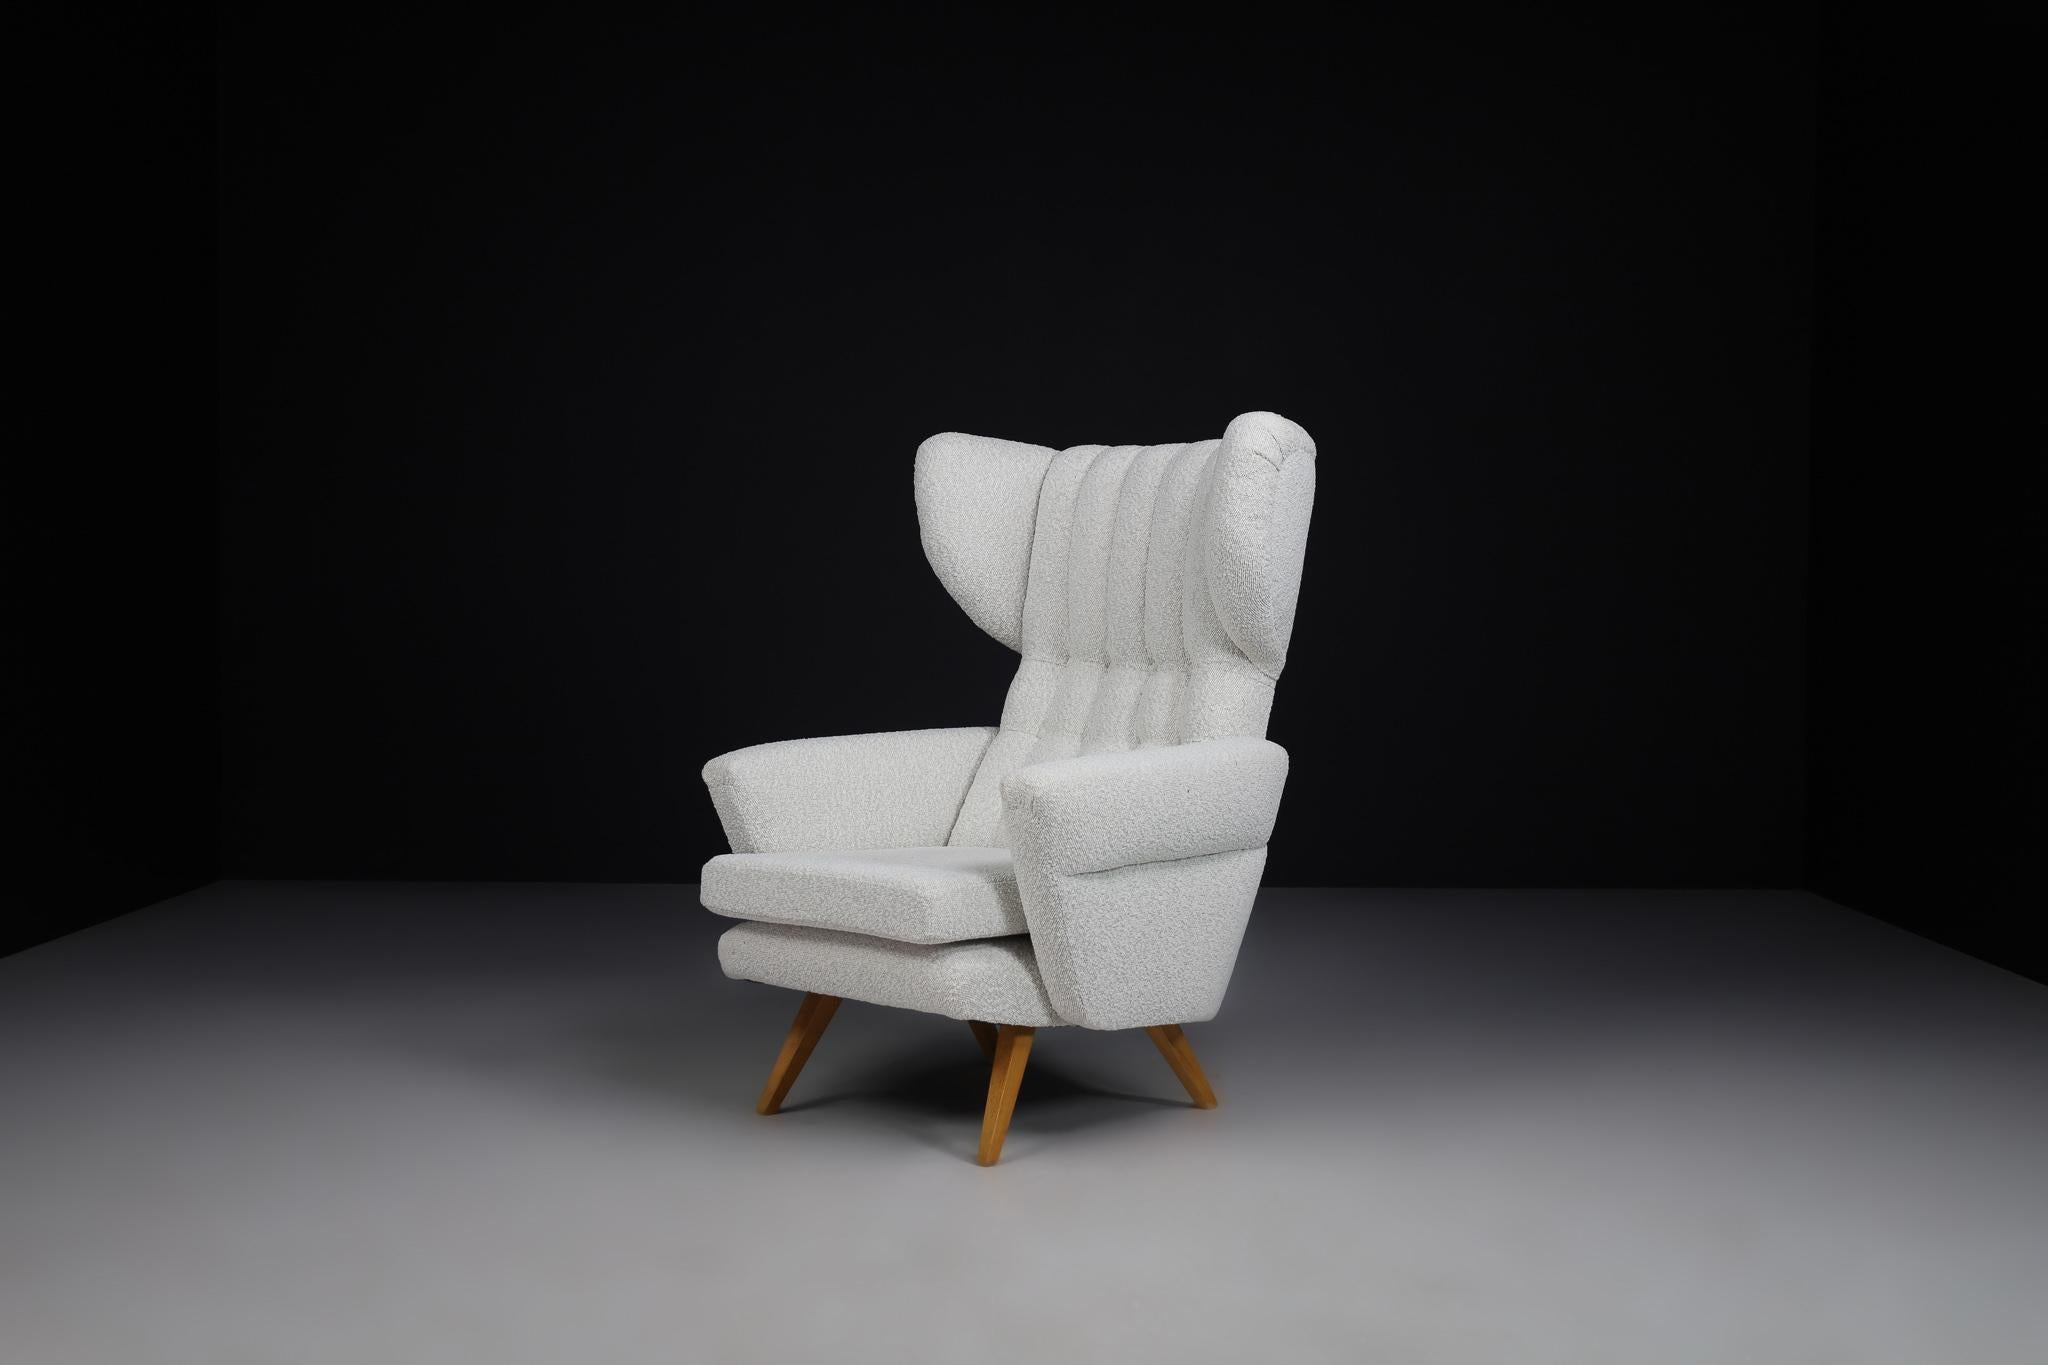 Mid Century High Back Lounge chair in Reupholstered Bouclé Fabric, Praque 1950s

Large midcentury wingback armchair in re-upholstered bouclé fabric, Czech republic 1950s. This armchair would be an eye-catching addition to any interior, such as a